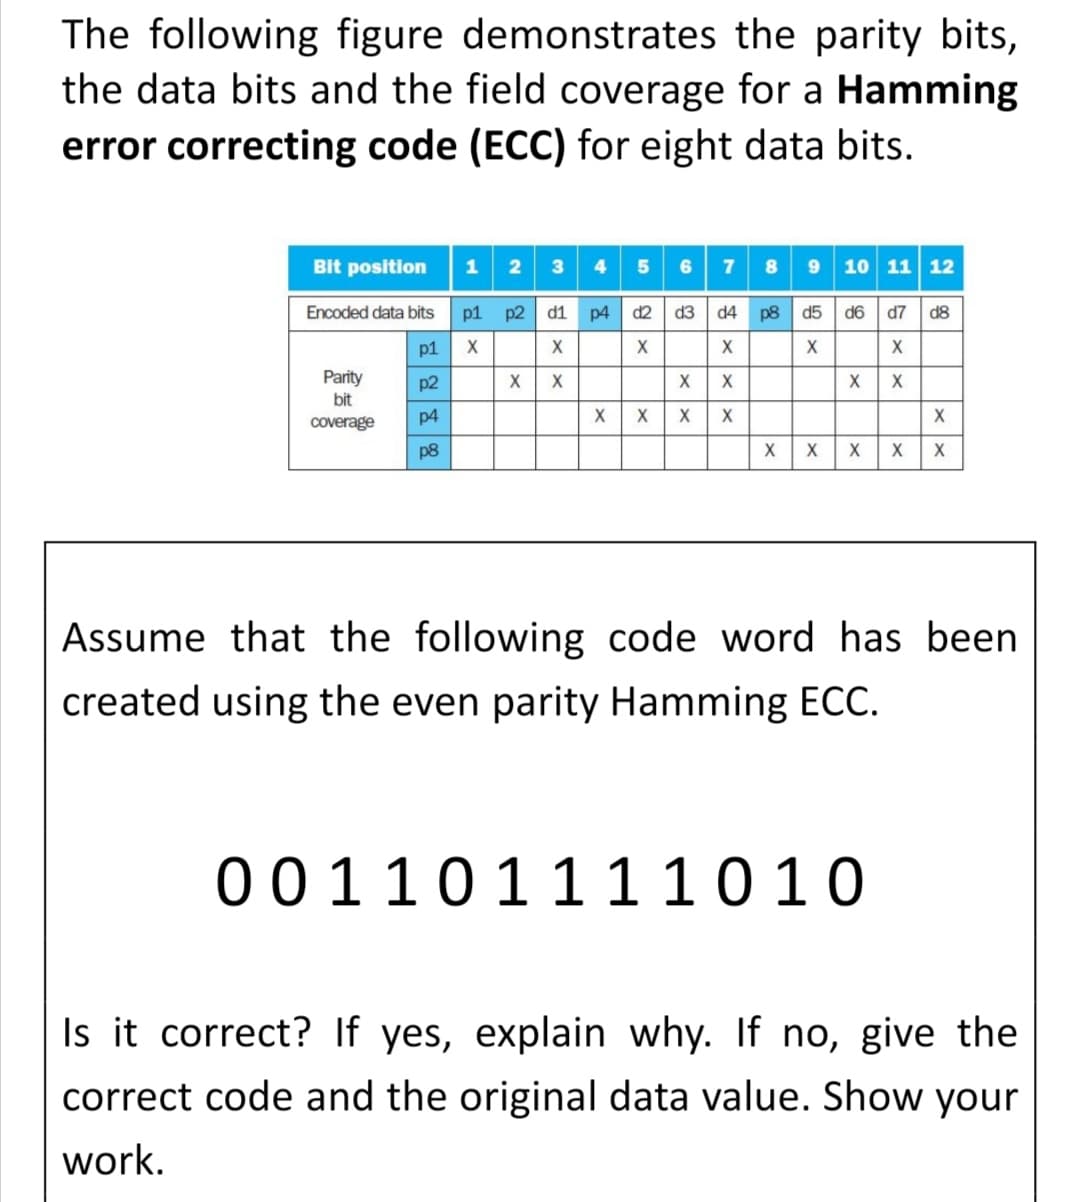 The following figure demonstrates the parity bits,
the data bits and the field coverage for a Hamming
error correcting code (ECC) for eight data bits.
Bit position
5 6 7 89 10 11 12
1
2
4.
Encoded data bits
p1
p2
d1
p4
d2
d3 d4
p8
d5 d6 d7
d8
p1
X
X
Parity
p2
X
X
bit
Coverage
p4
p8
X
Assume that the following code word has been
created using the even parity Hamming ECC.
001101111010
Is it correct? If yes, explain why. If no, give the
correct code and the original data value. Show your
work.
